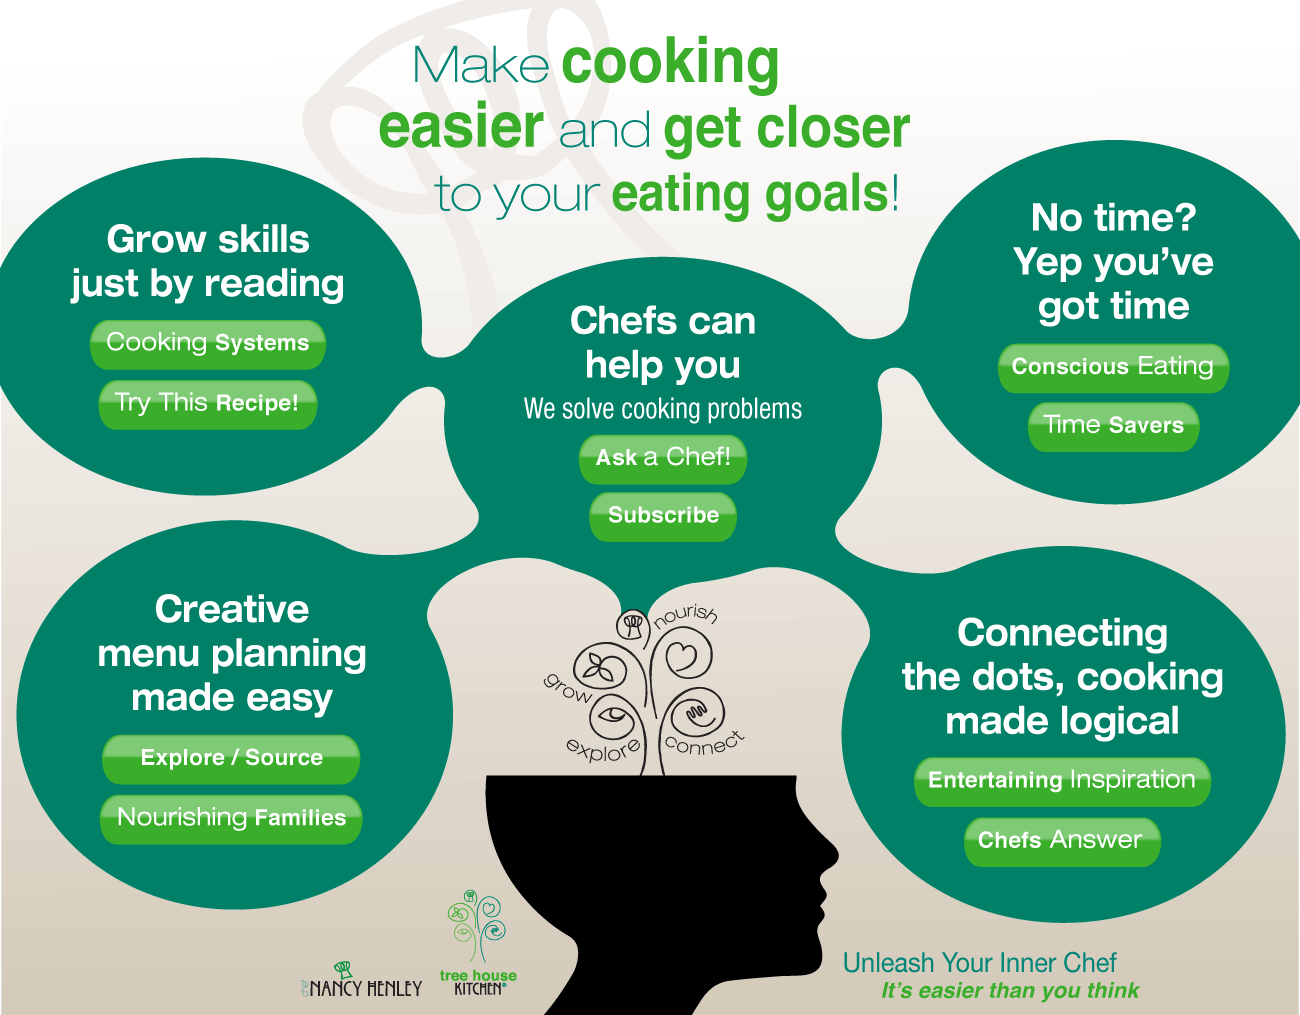 Make cooking easier and get closer to your eating goals with the Tree House Kitchen philosophy.